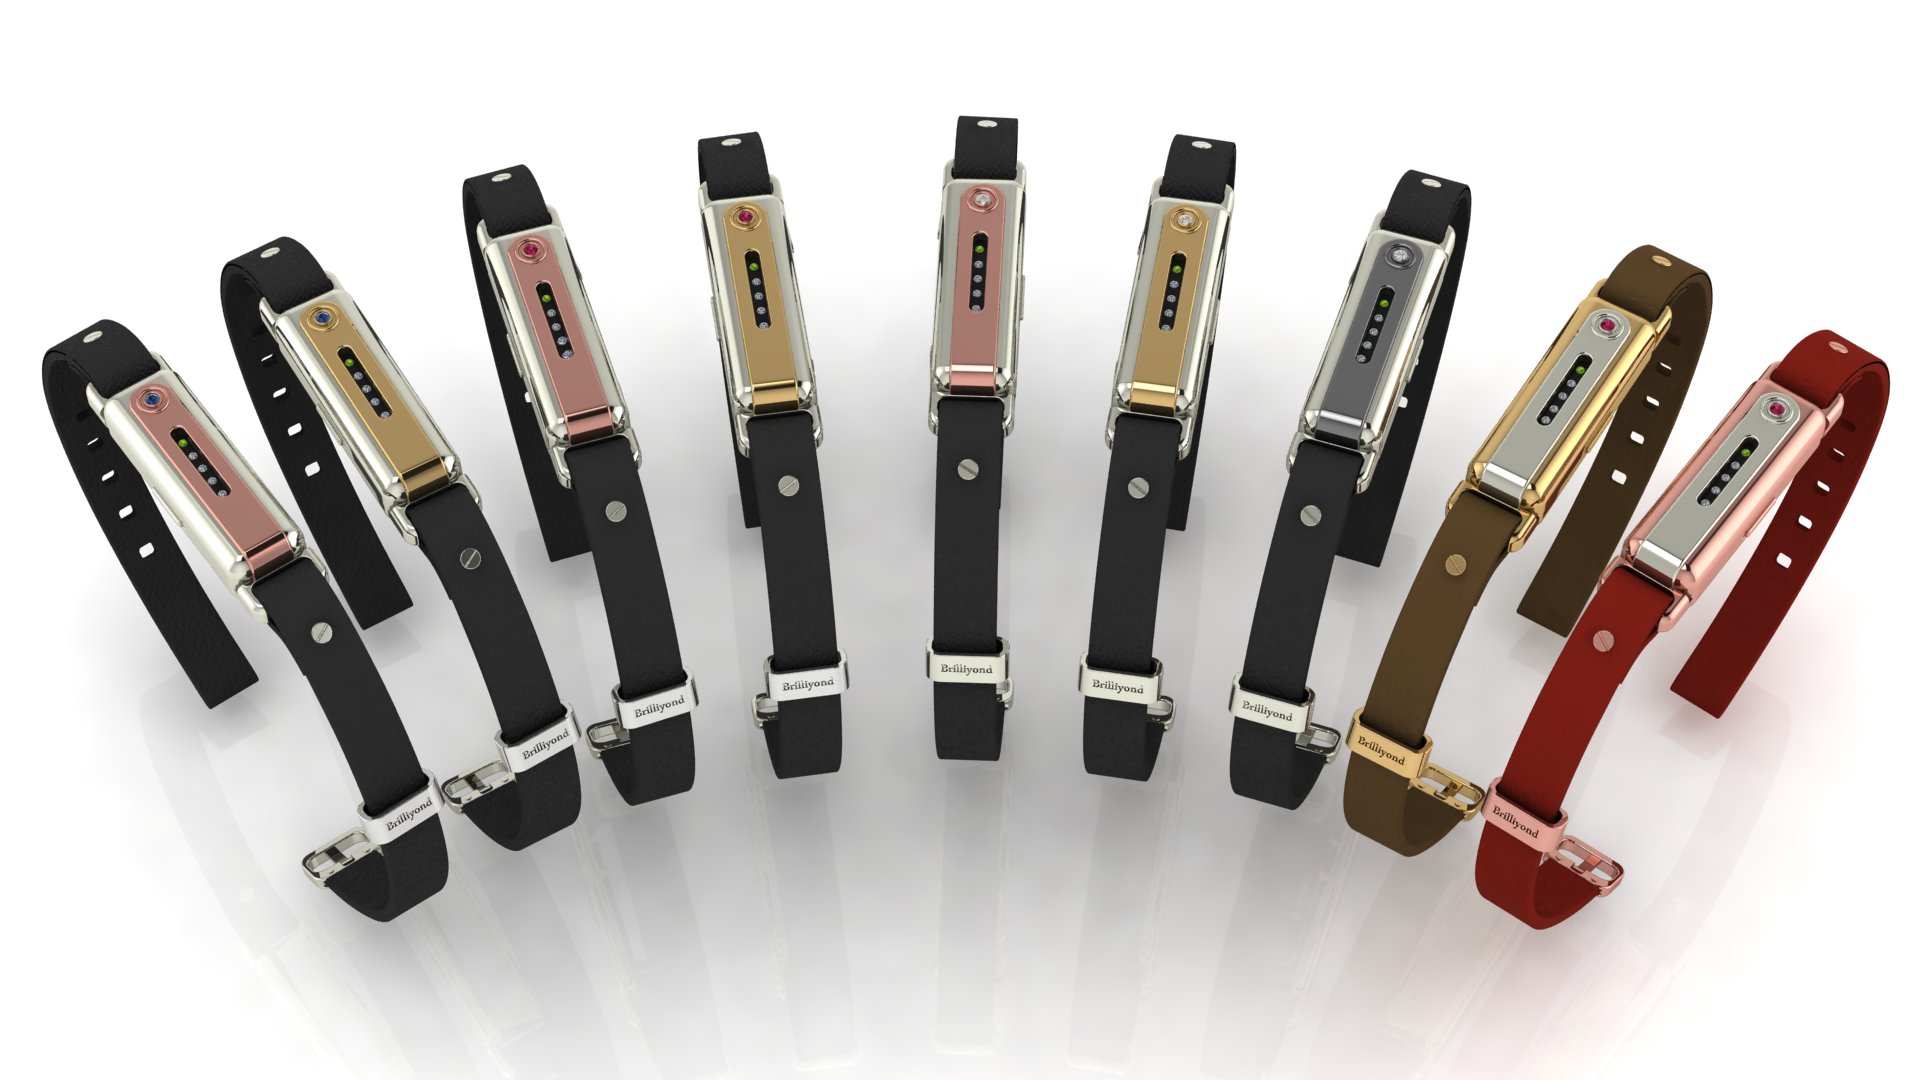 Brilliyond Smart Fitbit Bangle in different colours and designs.